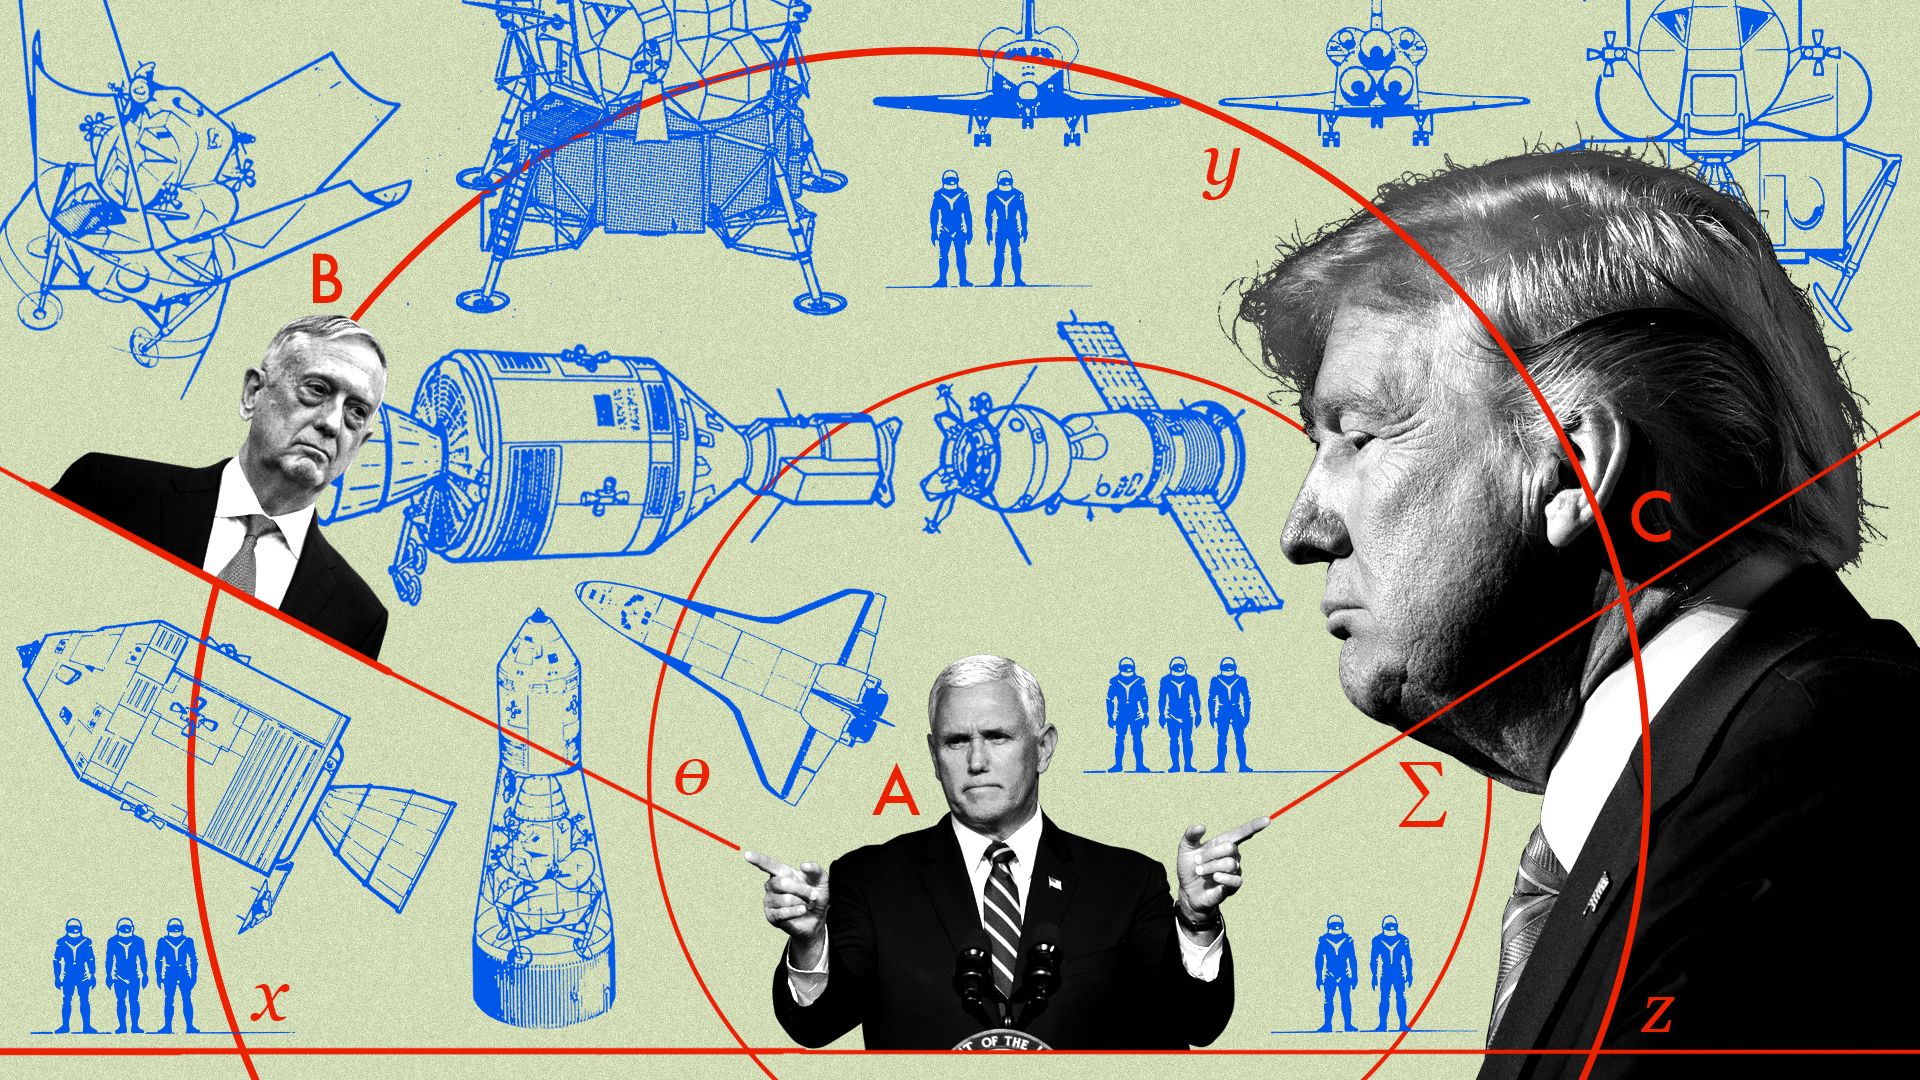 This diagram shows Mike Pence, John Kelly and Donald Trump with space stuff